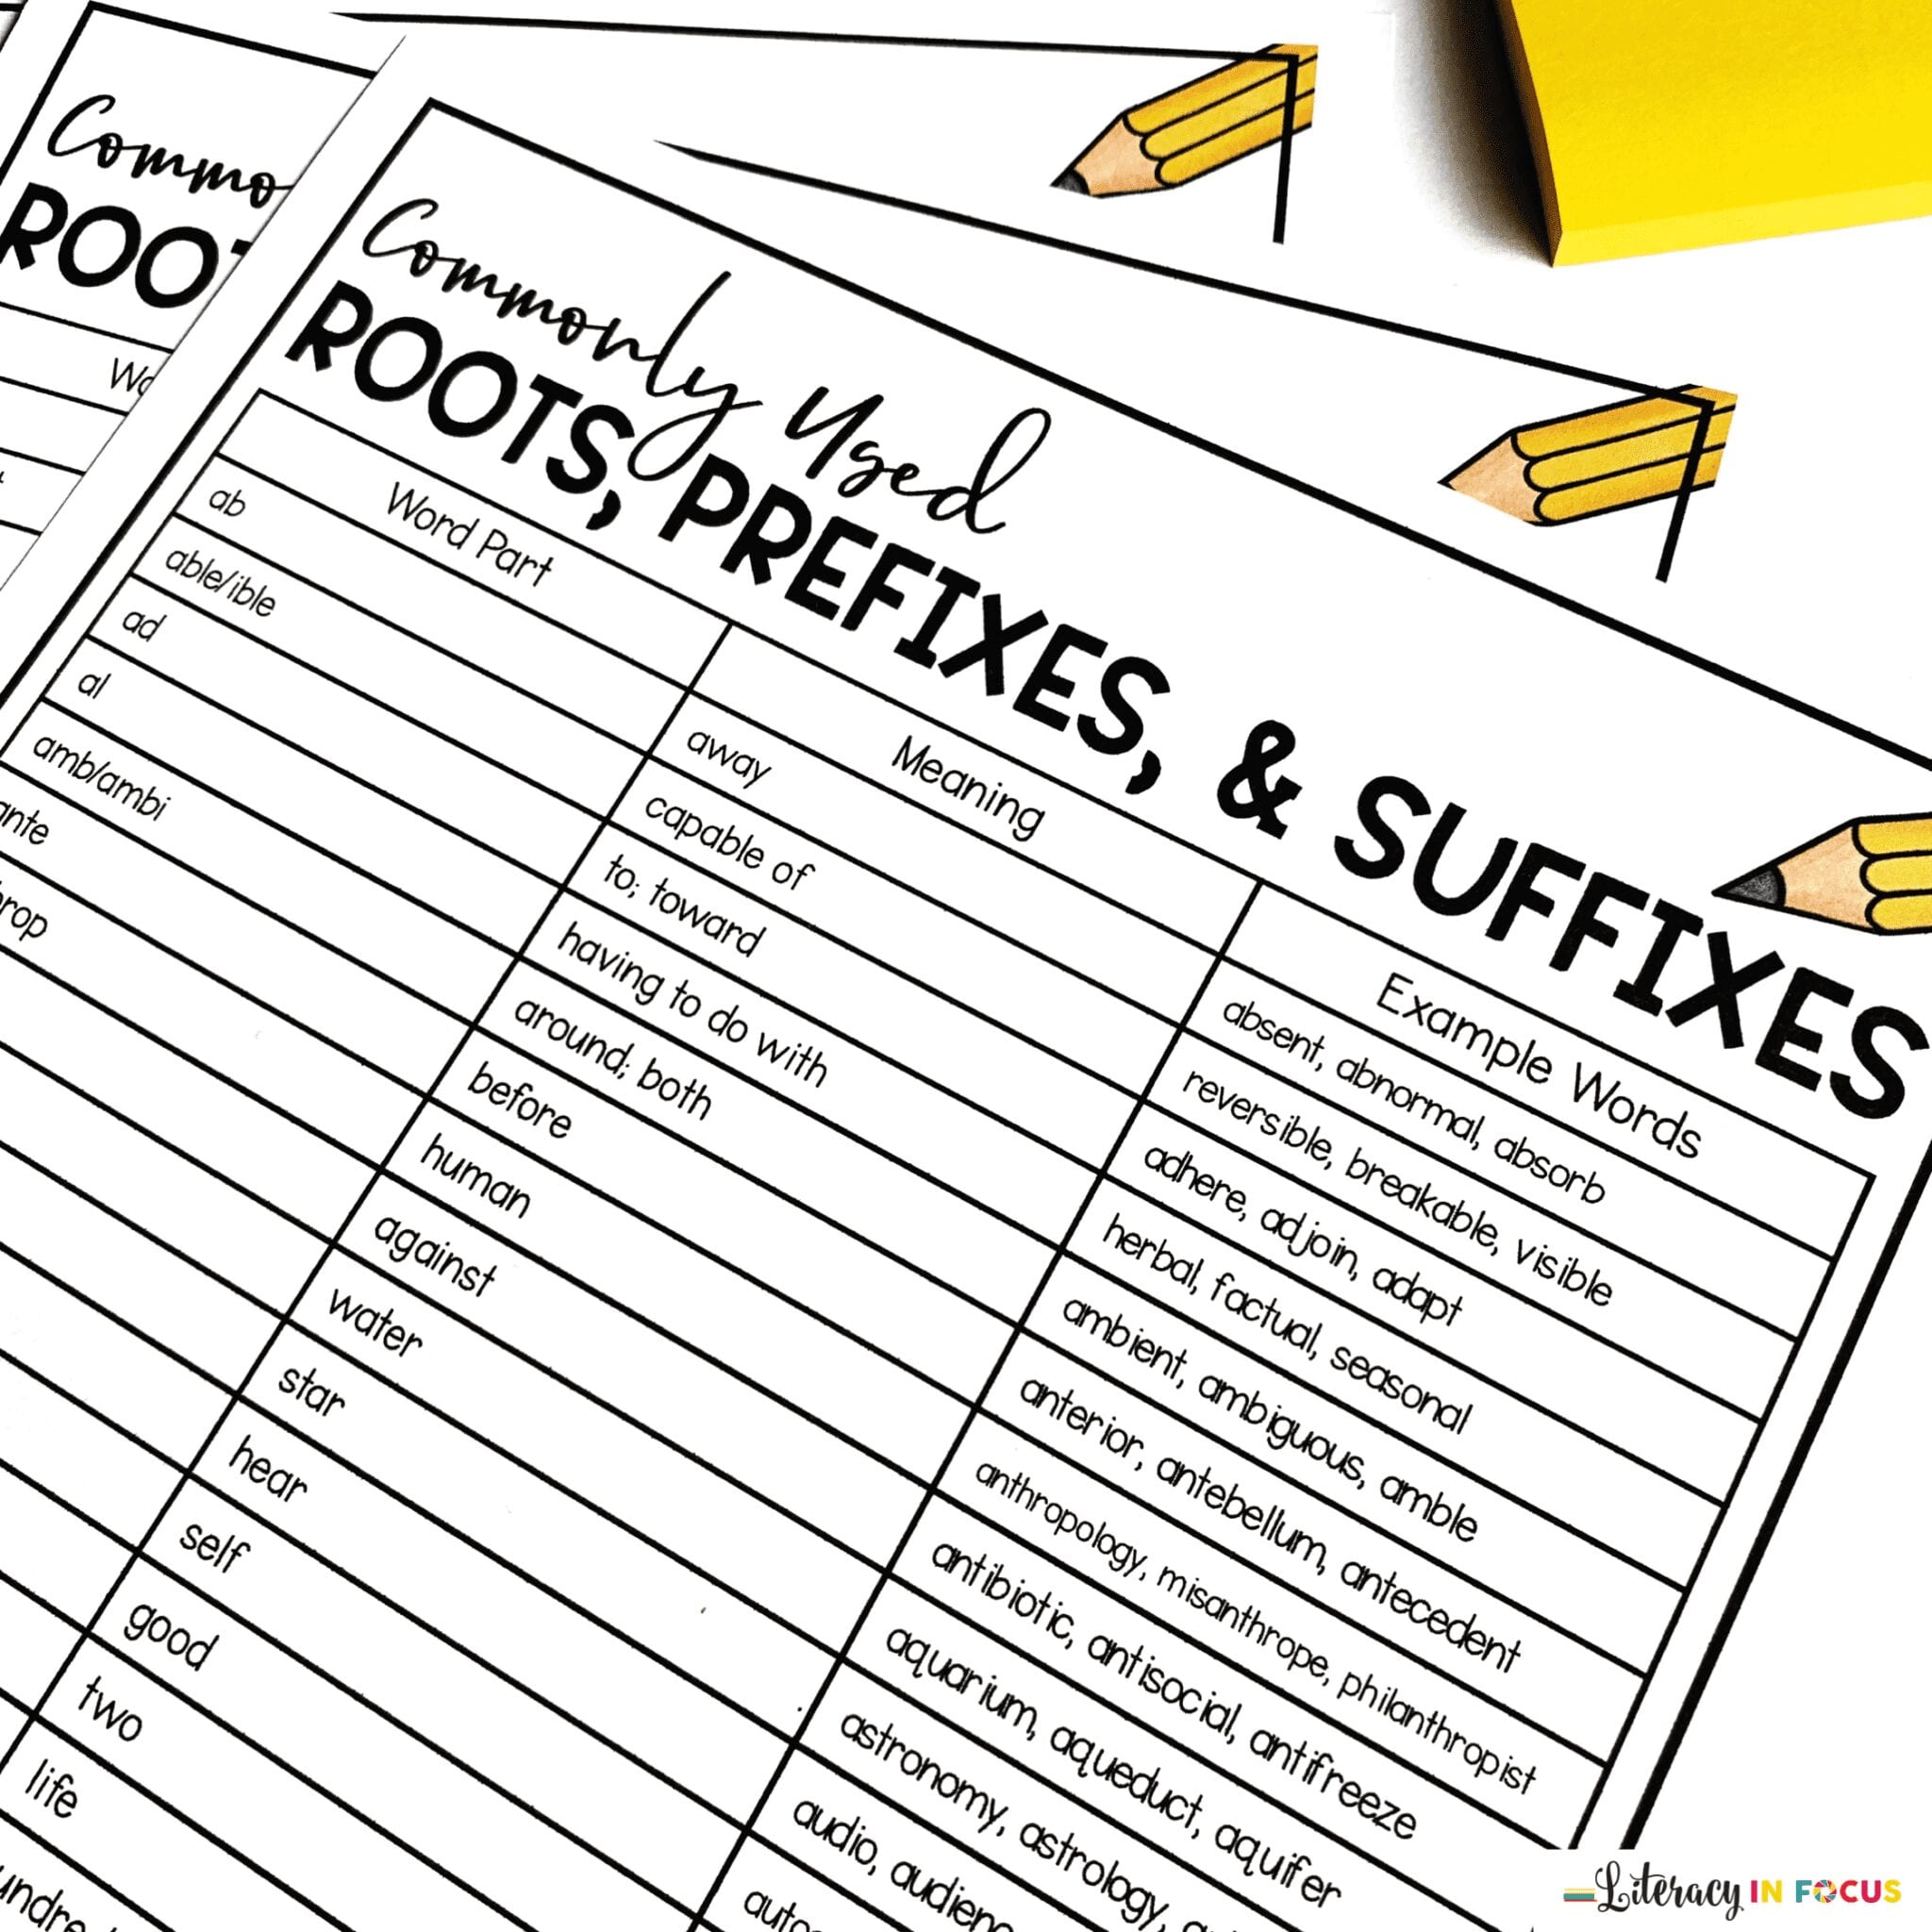 22 Root Words, Prefixes, and Suffixes PDF List  Literacy In Focus Intended For Root Words Worksheet Pdf